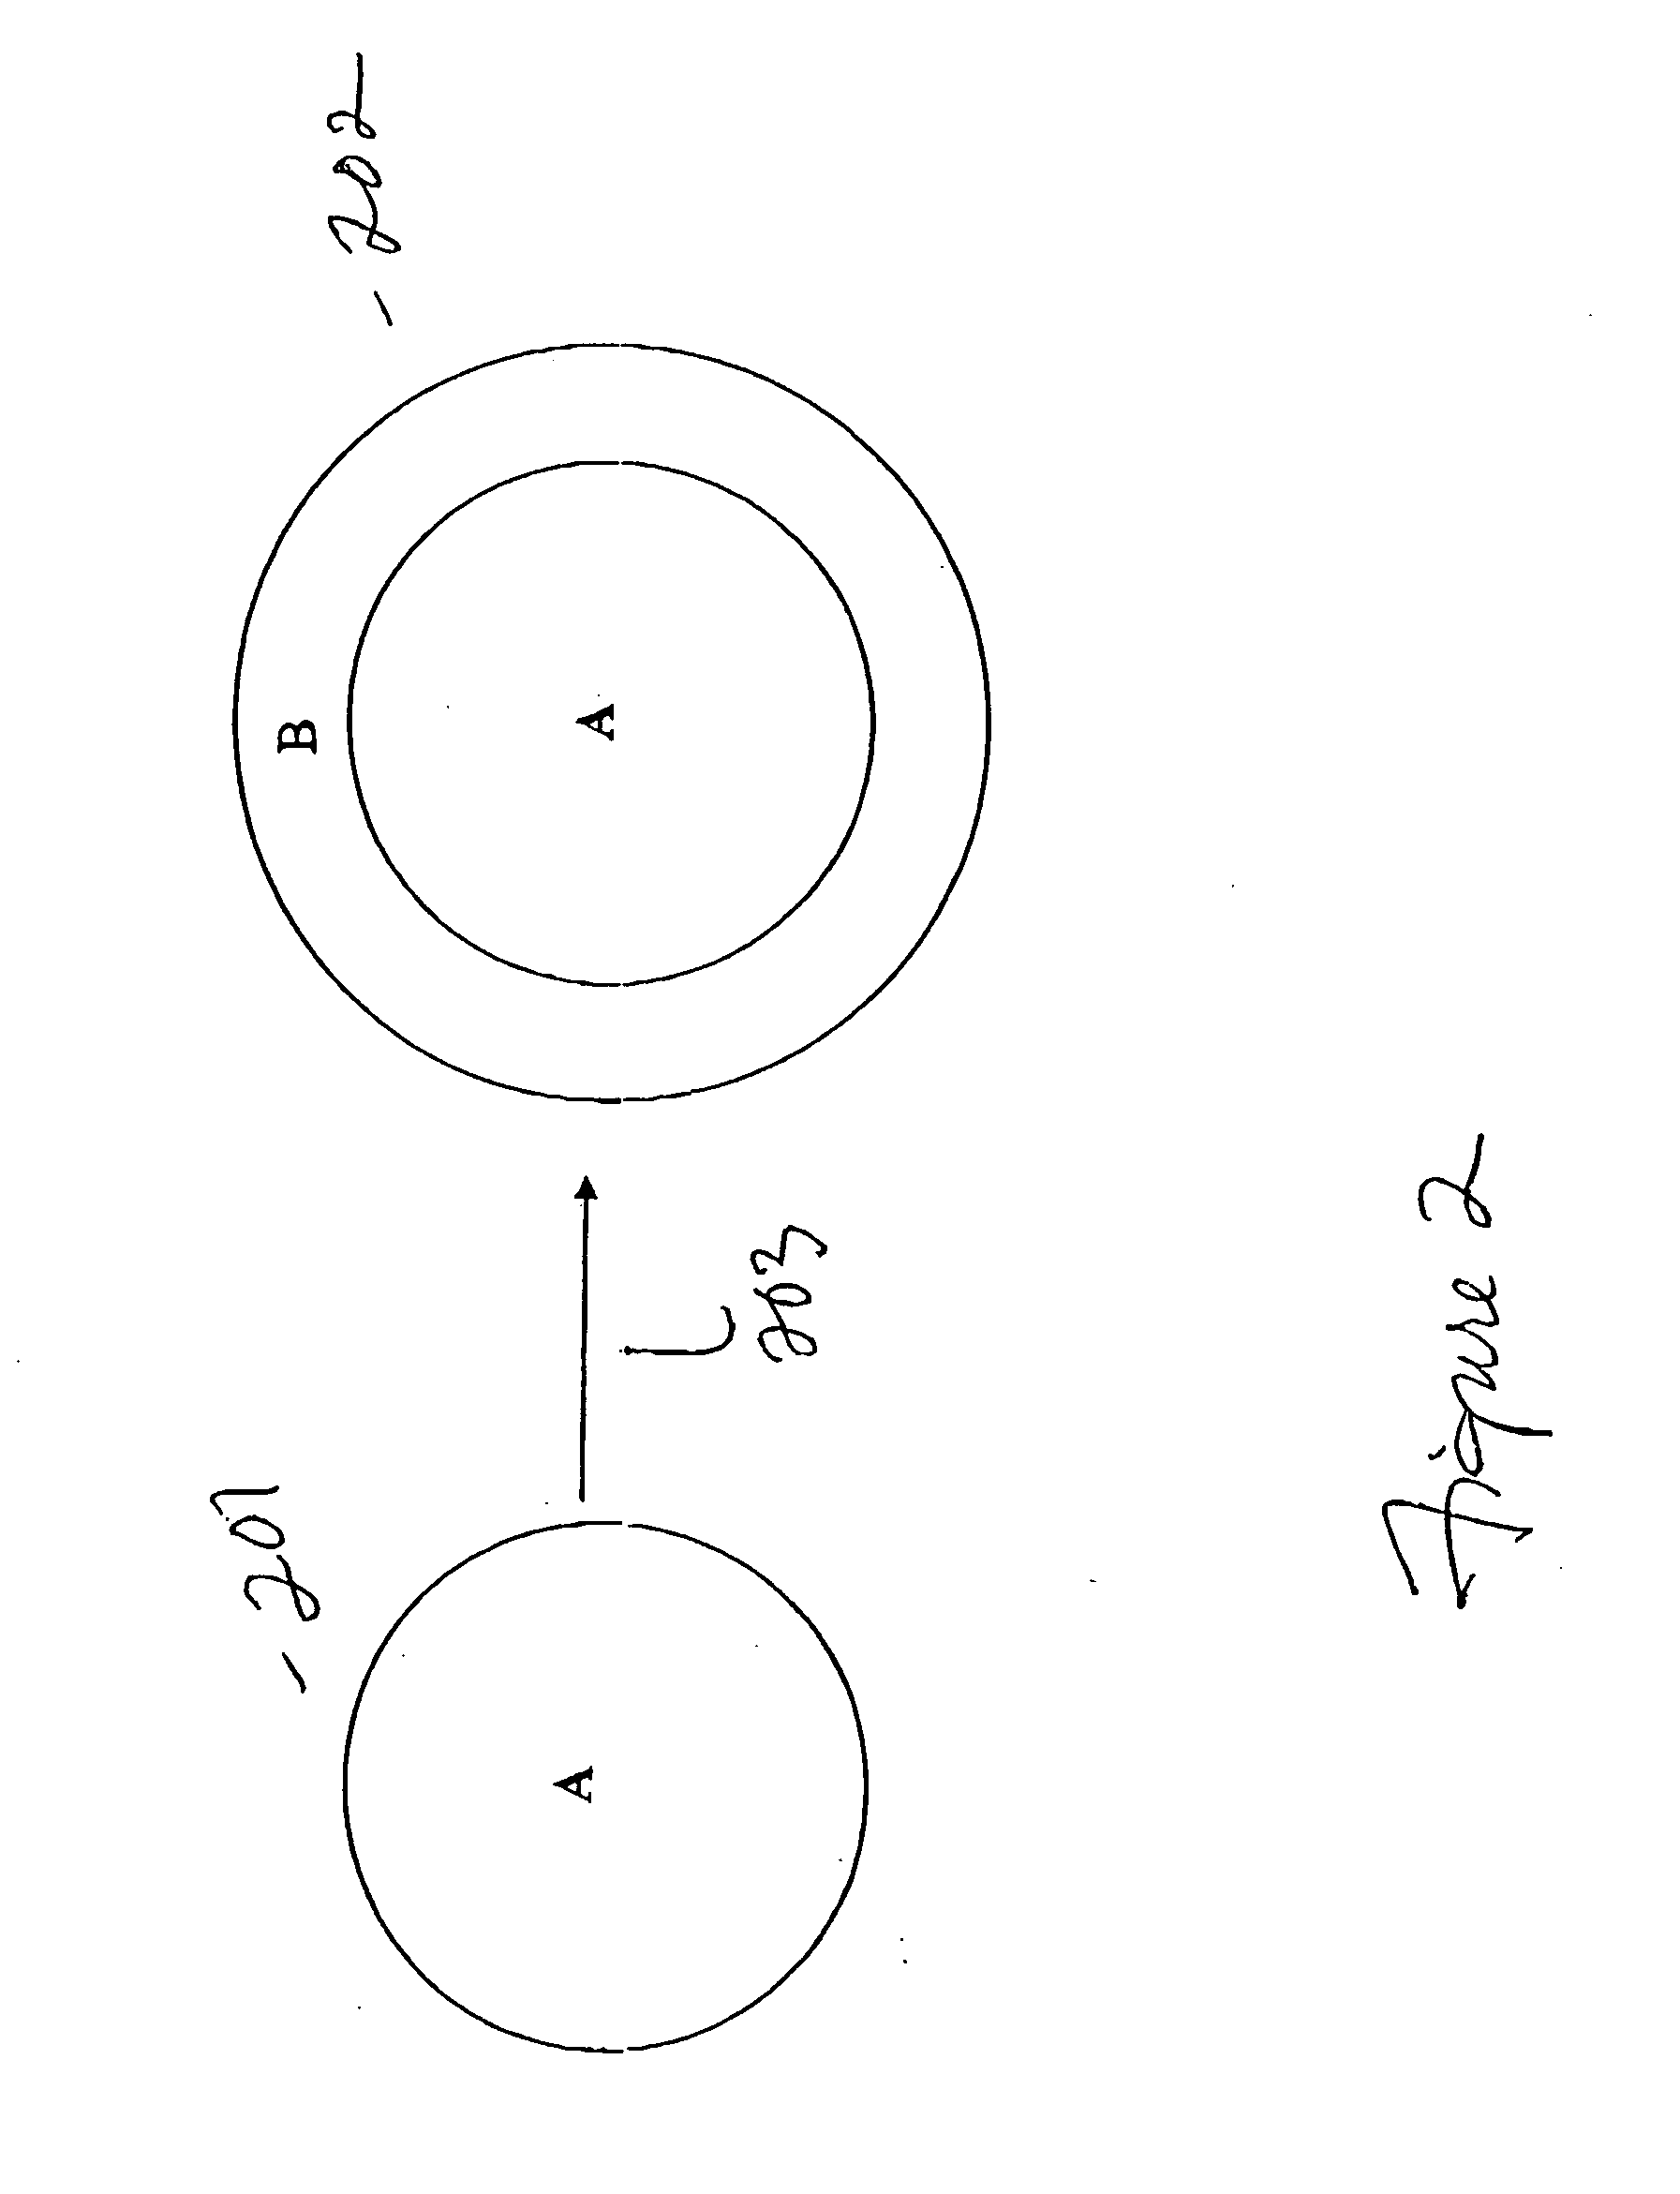 System and method for electronic wallet conversion